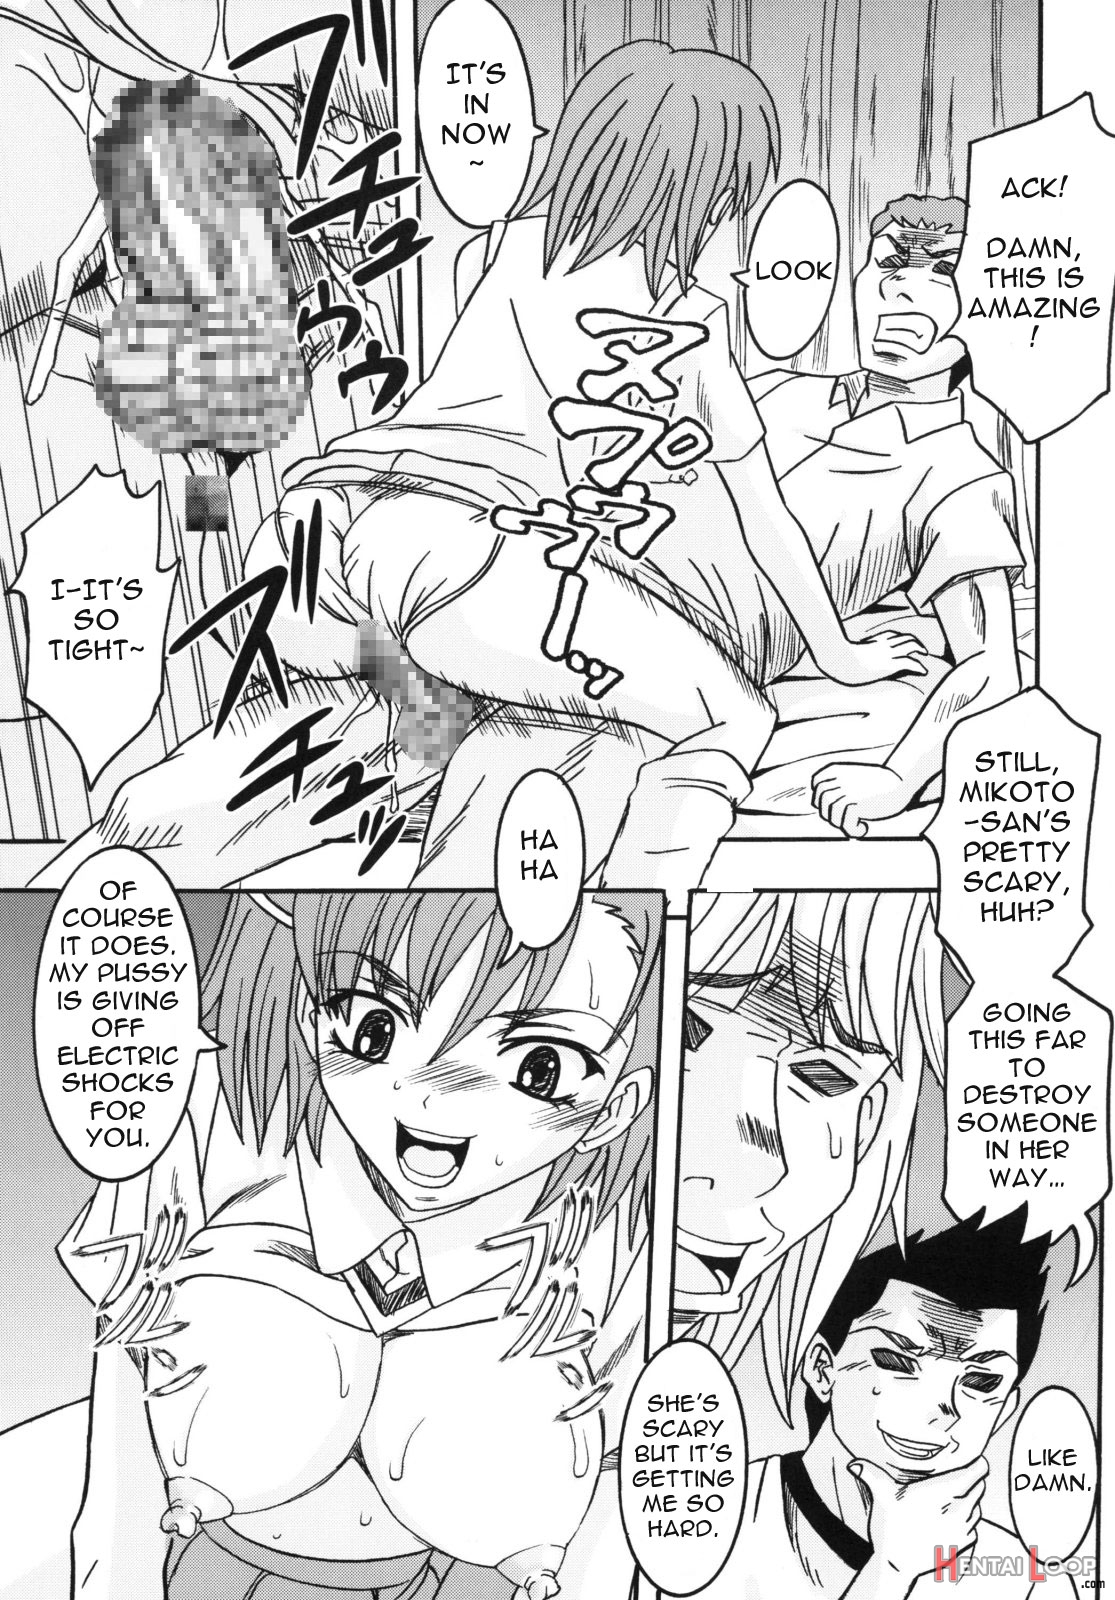 A Certain Magical Lewd Index #2 page 15